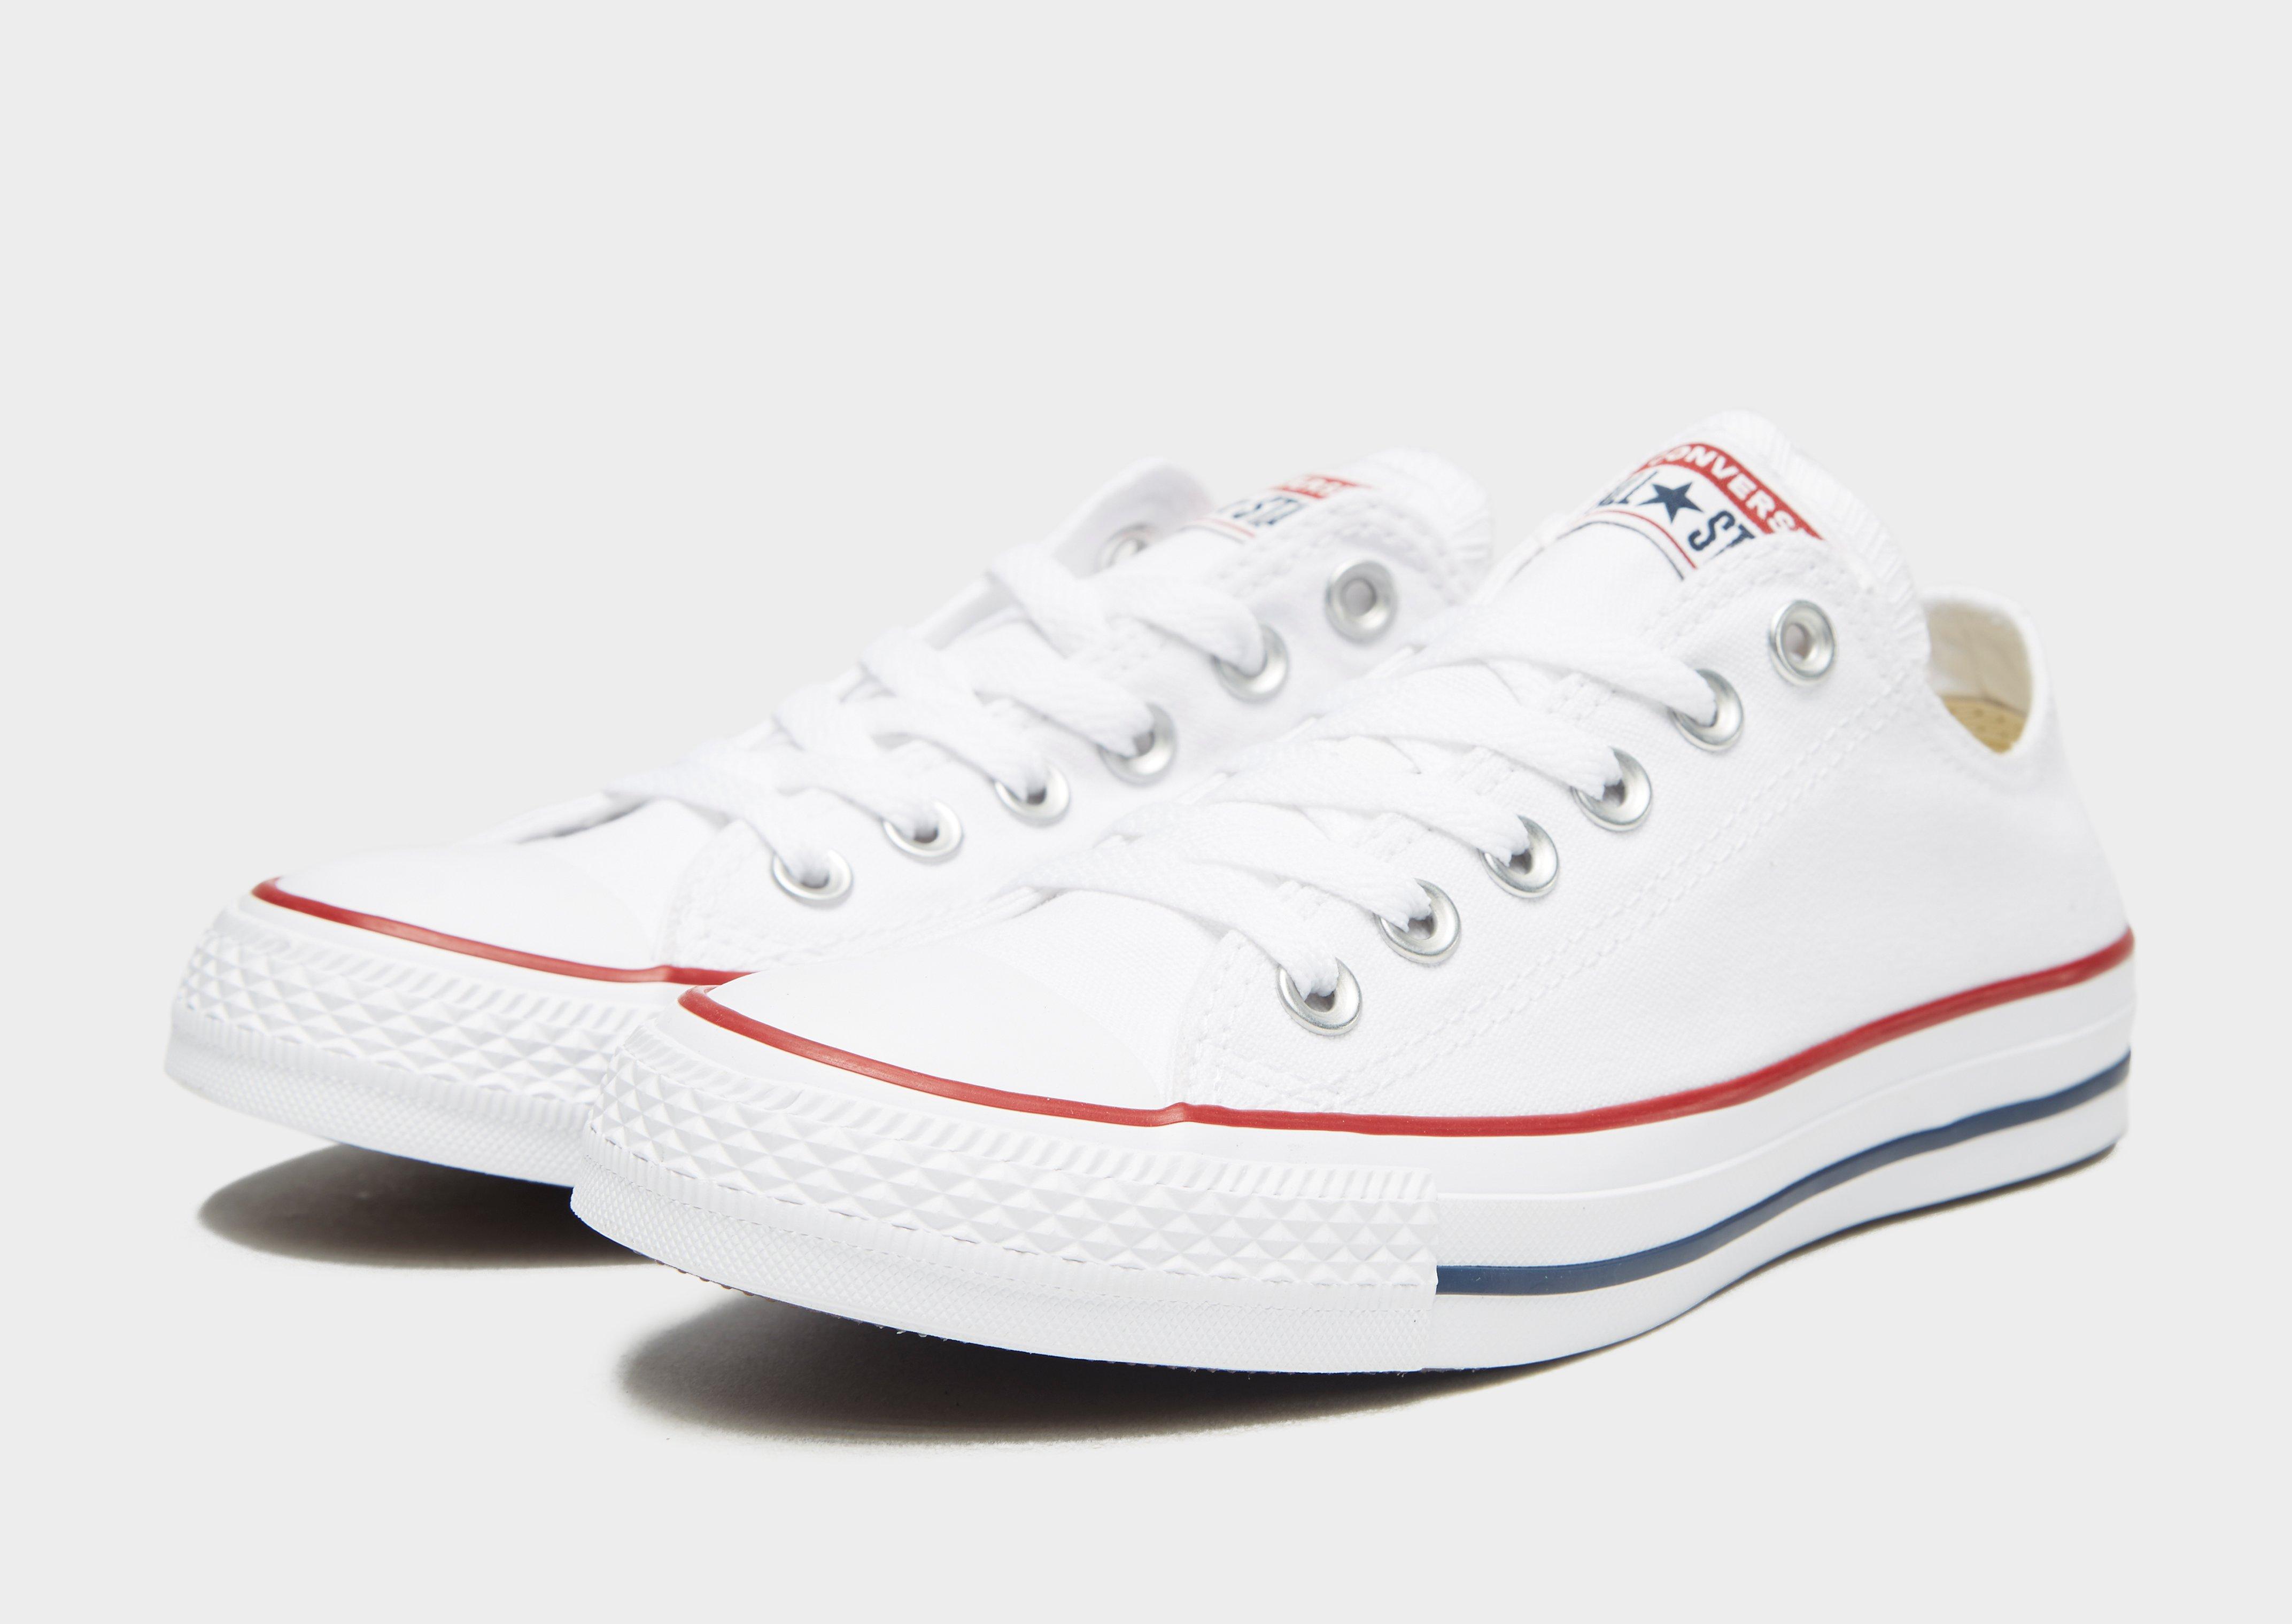 jd sports converse shoes 